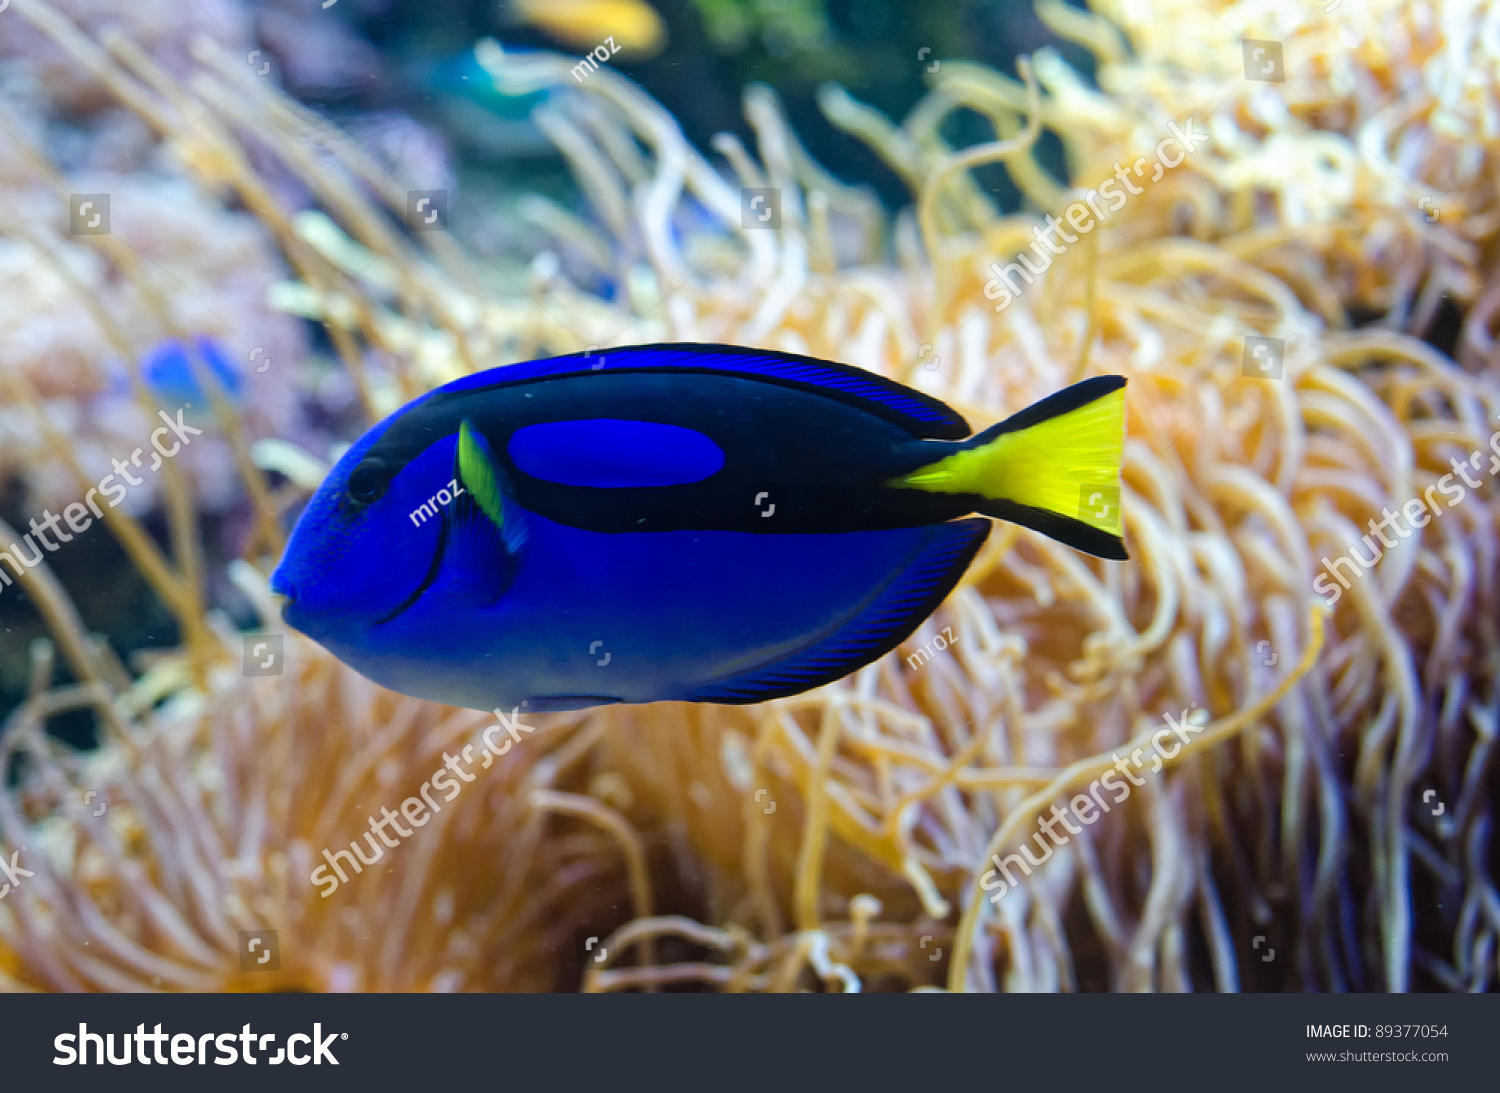 What kind of fish is Dory from 